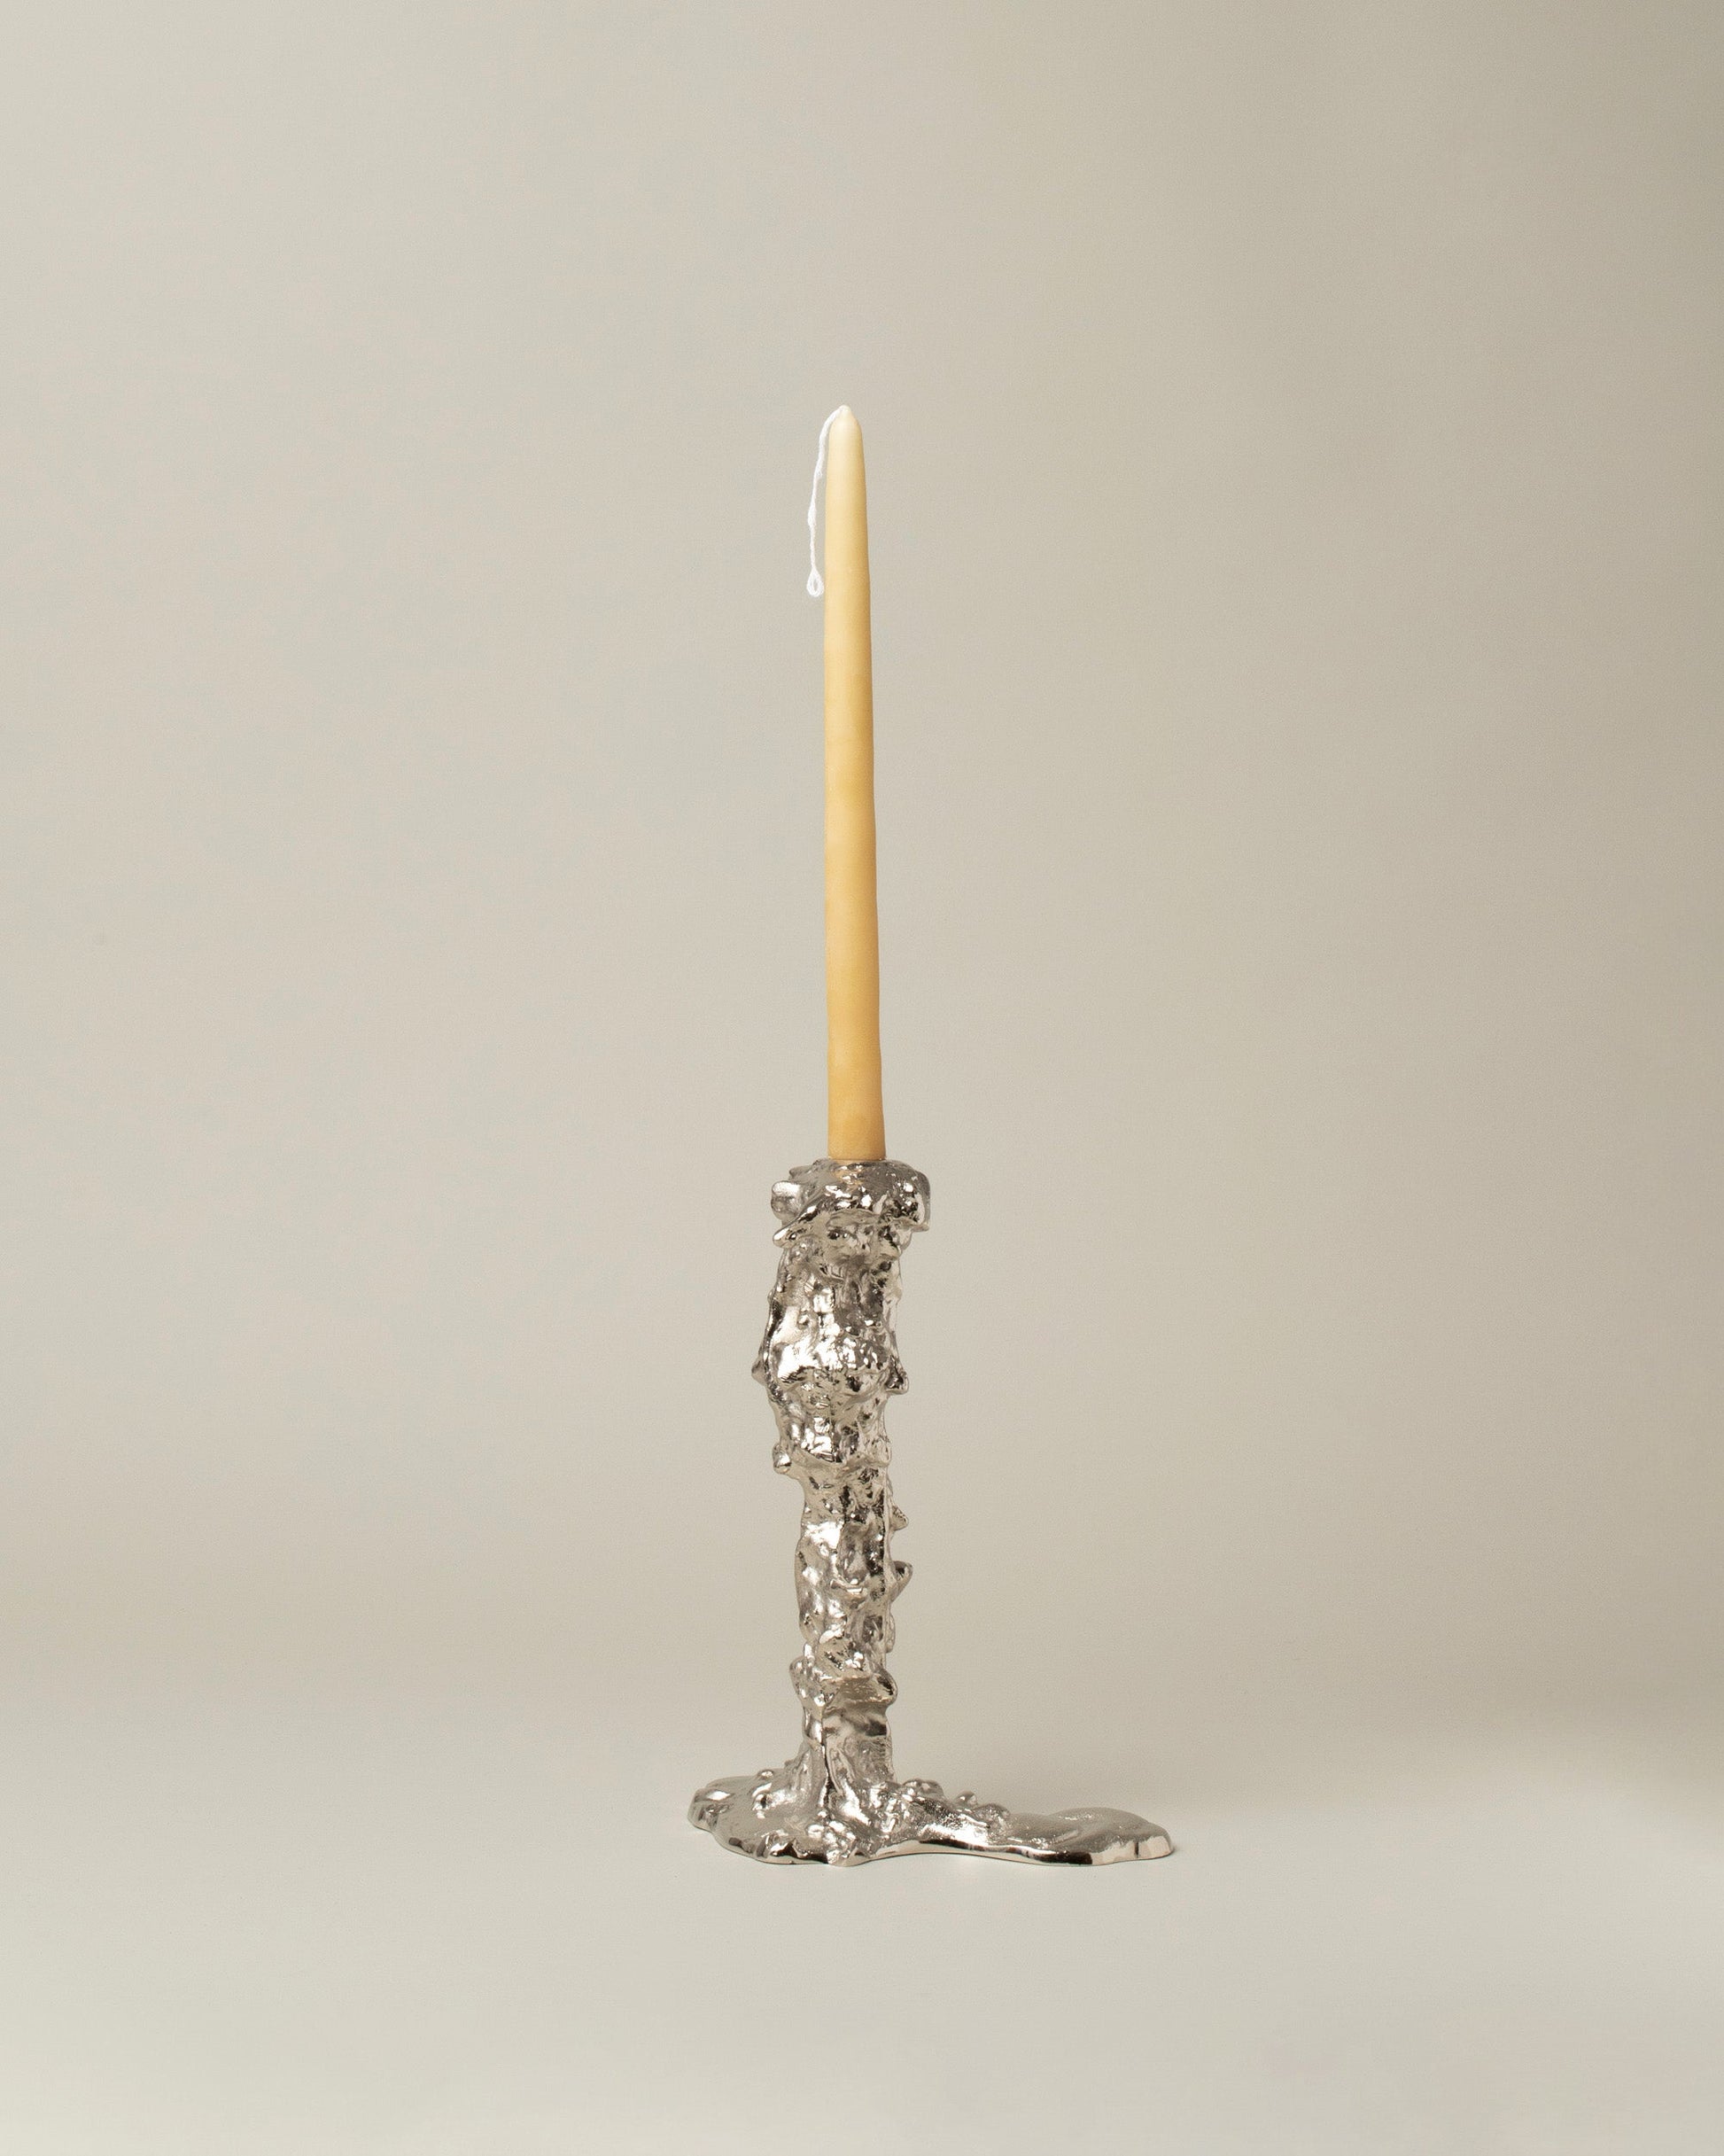 POLSPOTTEN Silver Medium Drip Candle Holder on light color background.